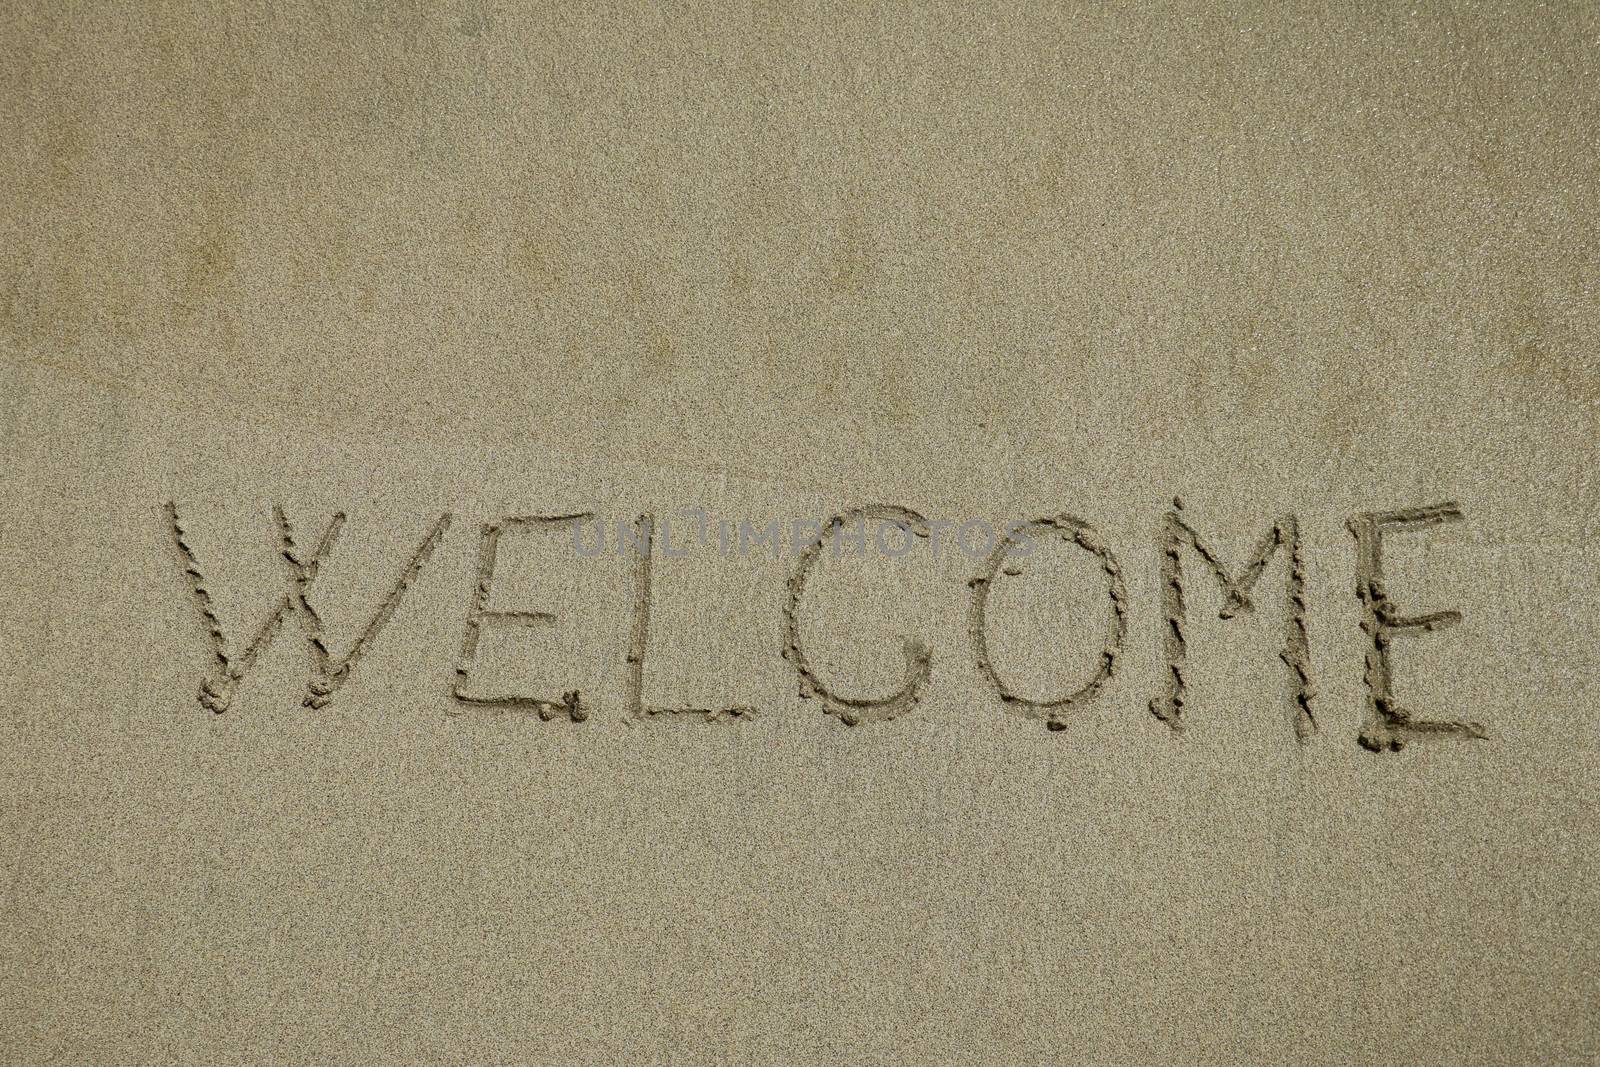 Inscription welcome on a wet sand. Welcome, texture on the beach sand.